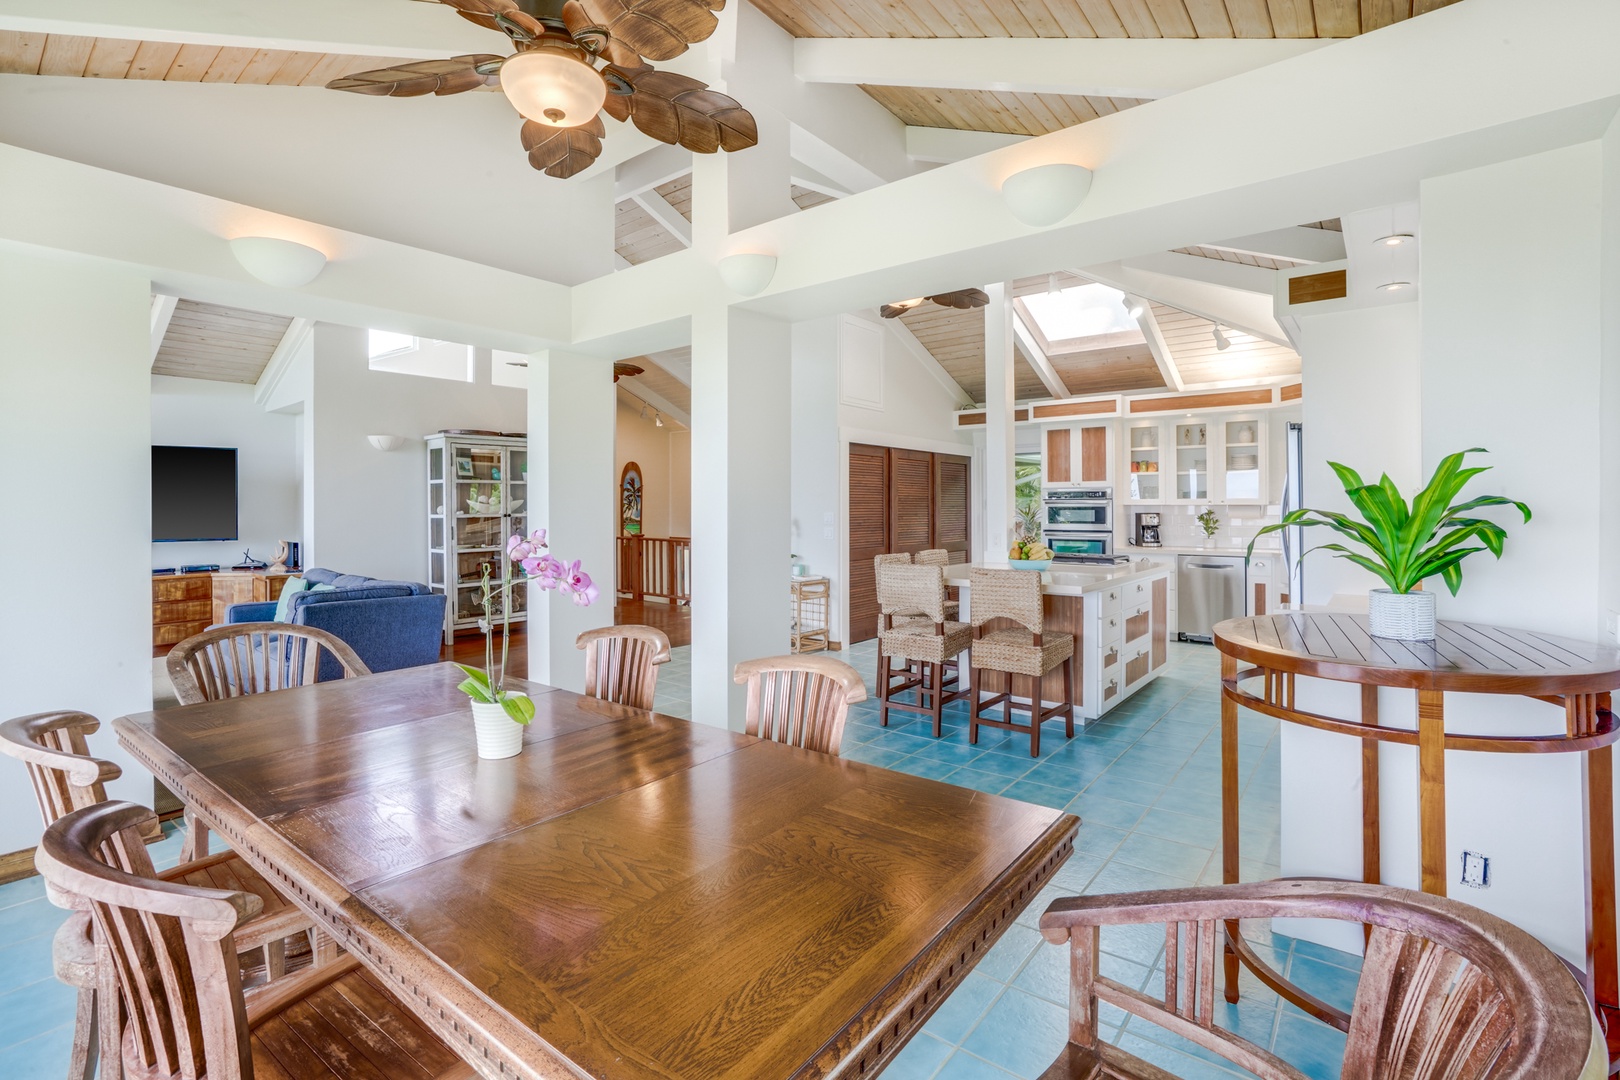 Princeville Vacation Rentals, Wai Lani - Culinary elegance meets airy spaciousness in our kitchen, boasting high vaulted ceilings and an inviting dining area for six.